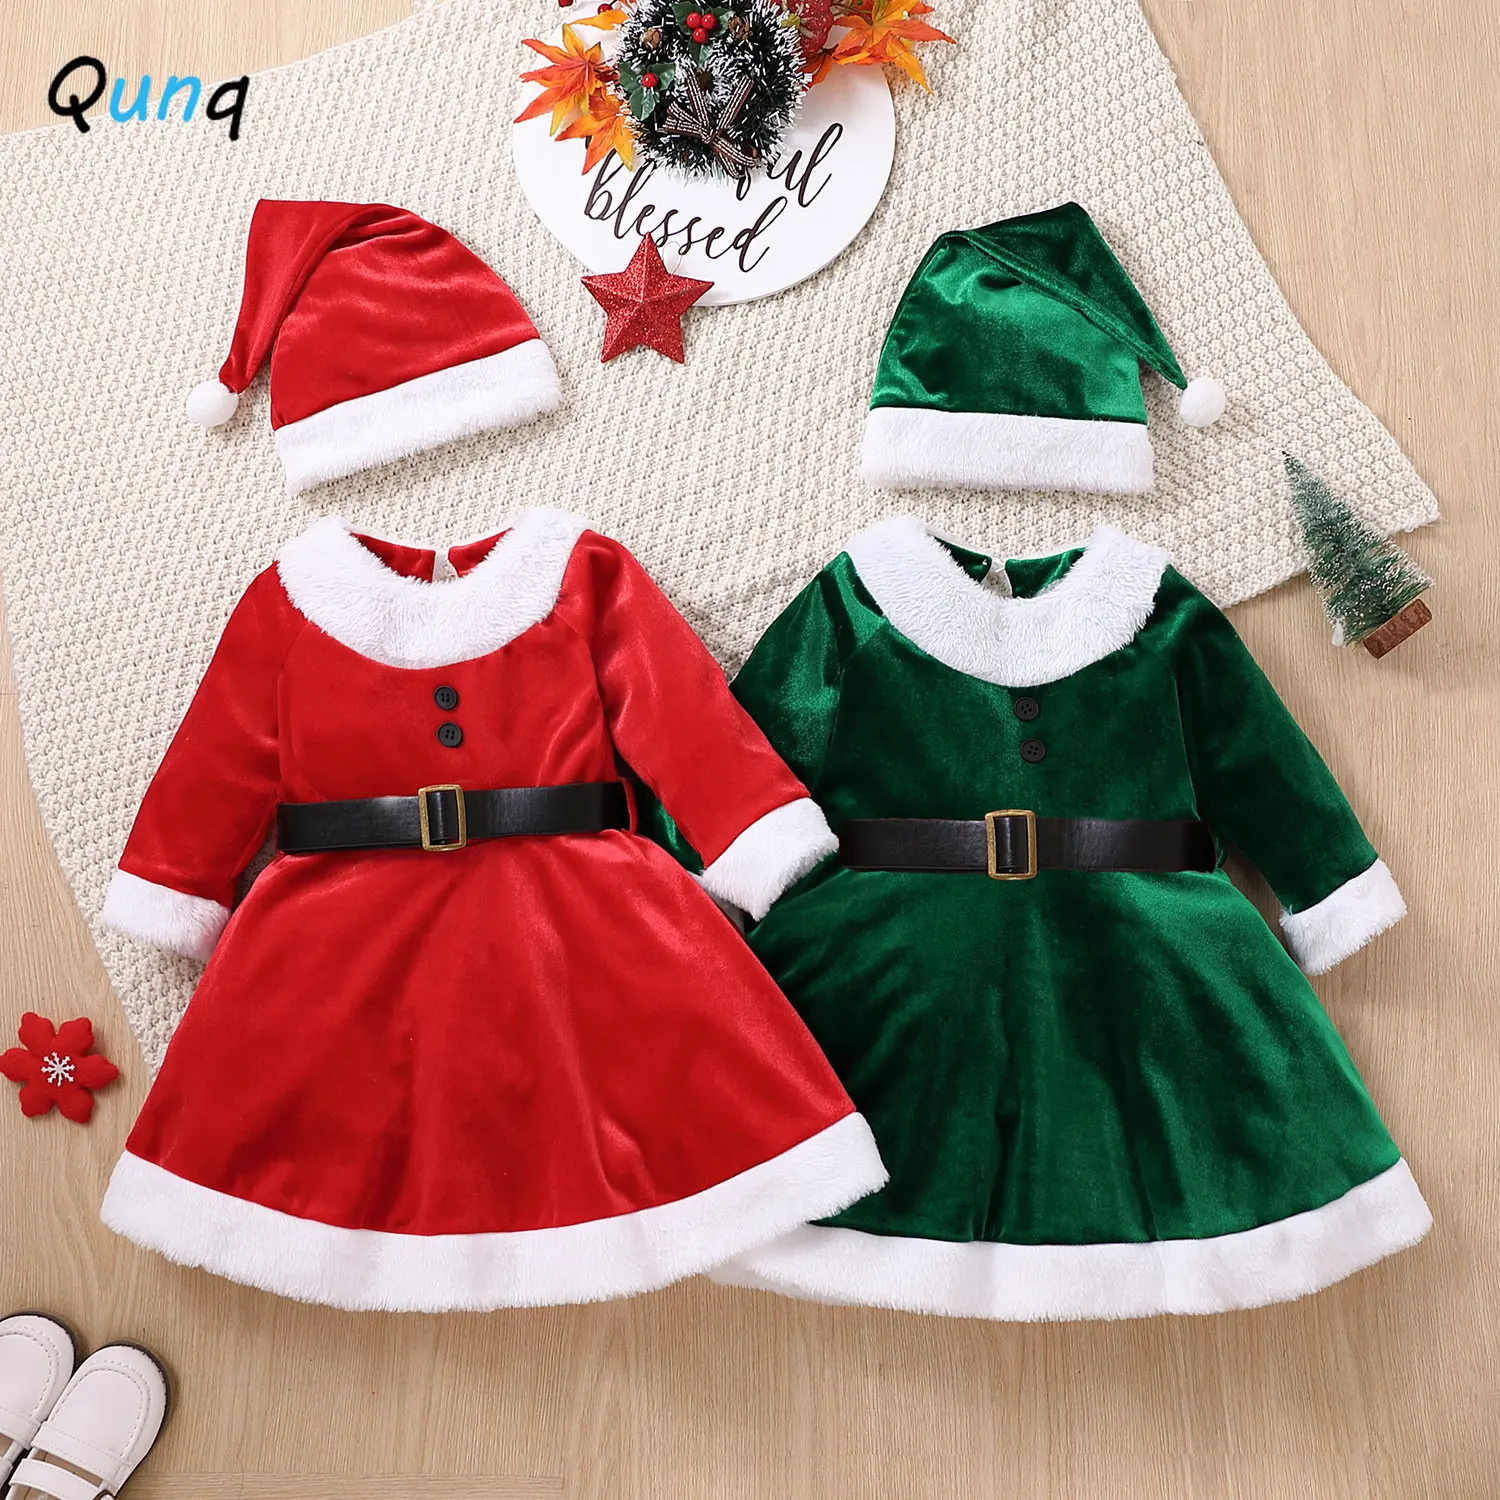 

Qunq Autumn Winter Girls Christmas Clothes O Neck Long sleeve Splicing Belt Lovely Dress And Cap Casual Kids Clouthes Age 3T-8T